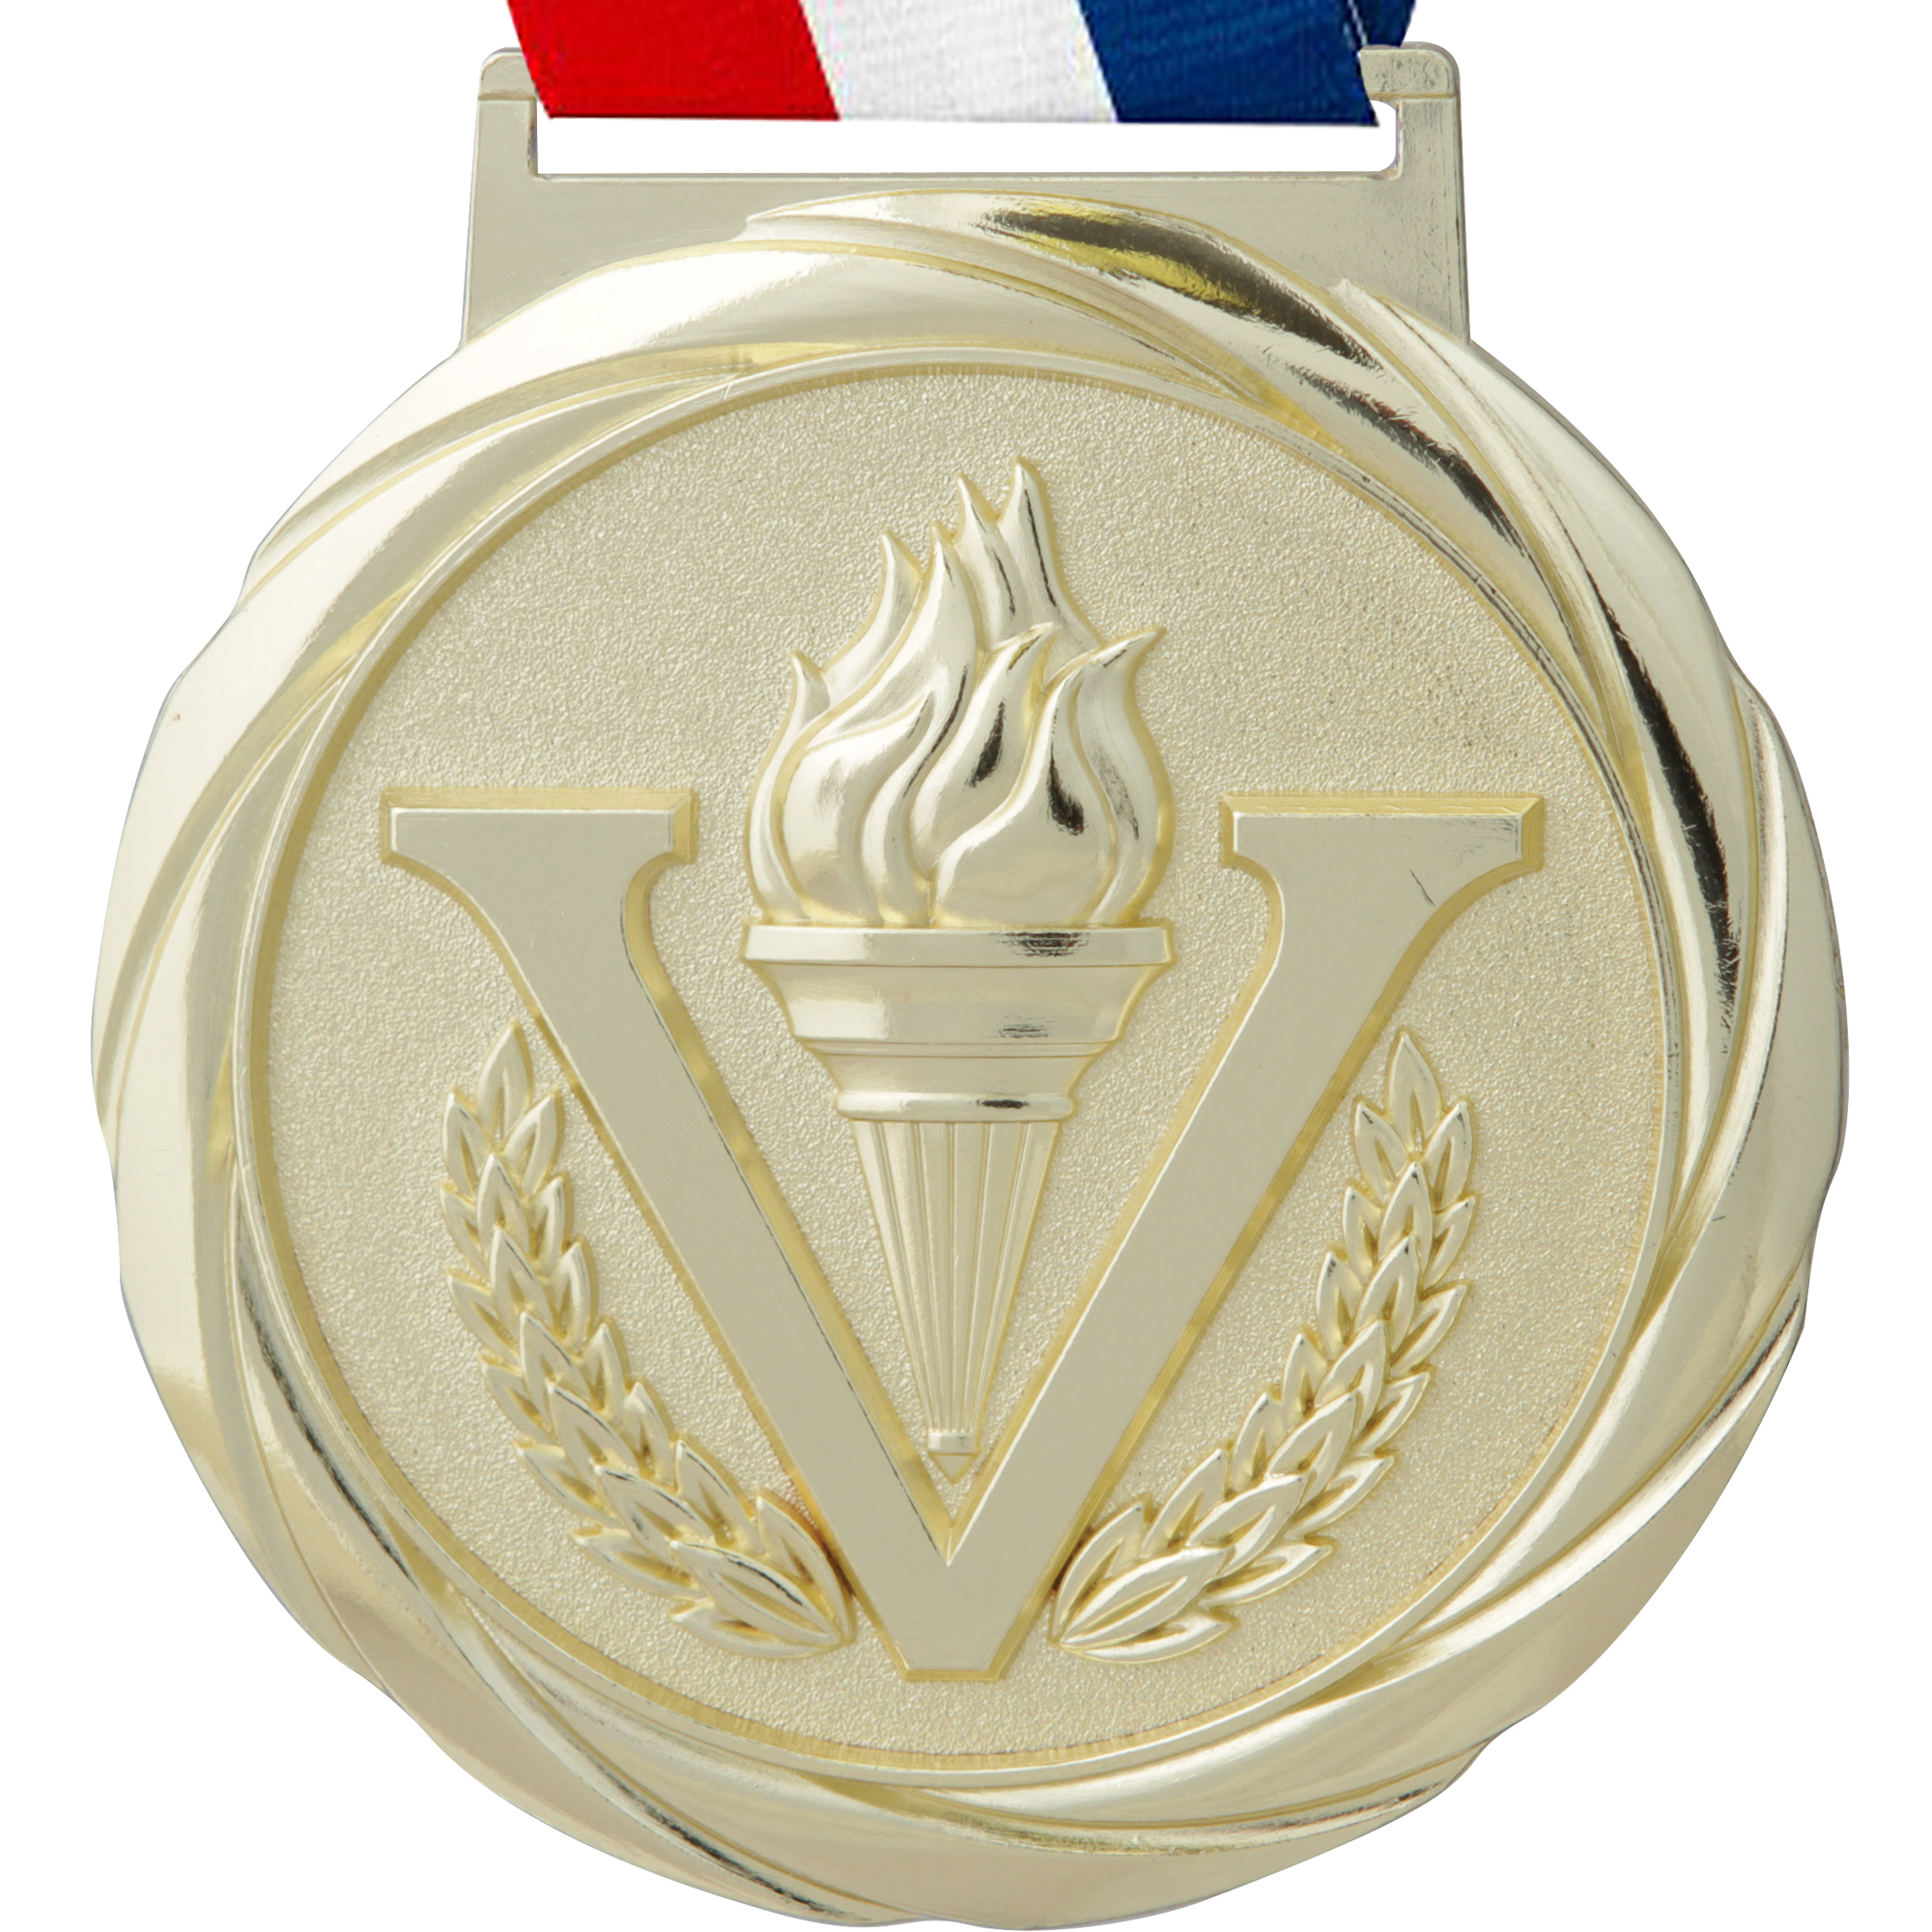 Victory Olympic Medal